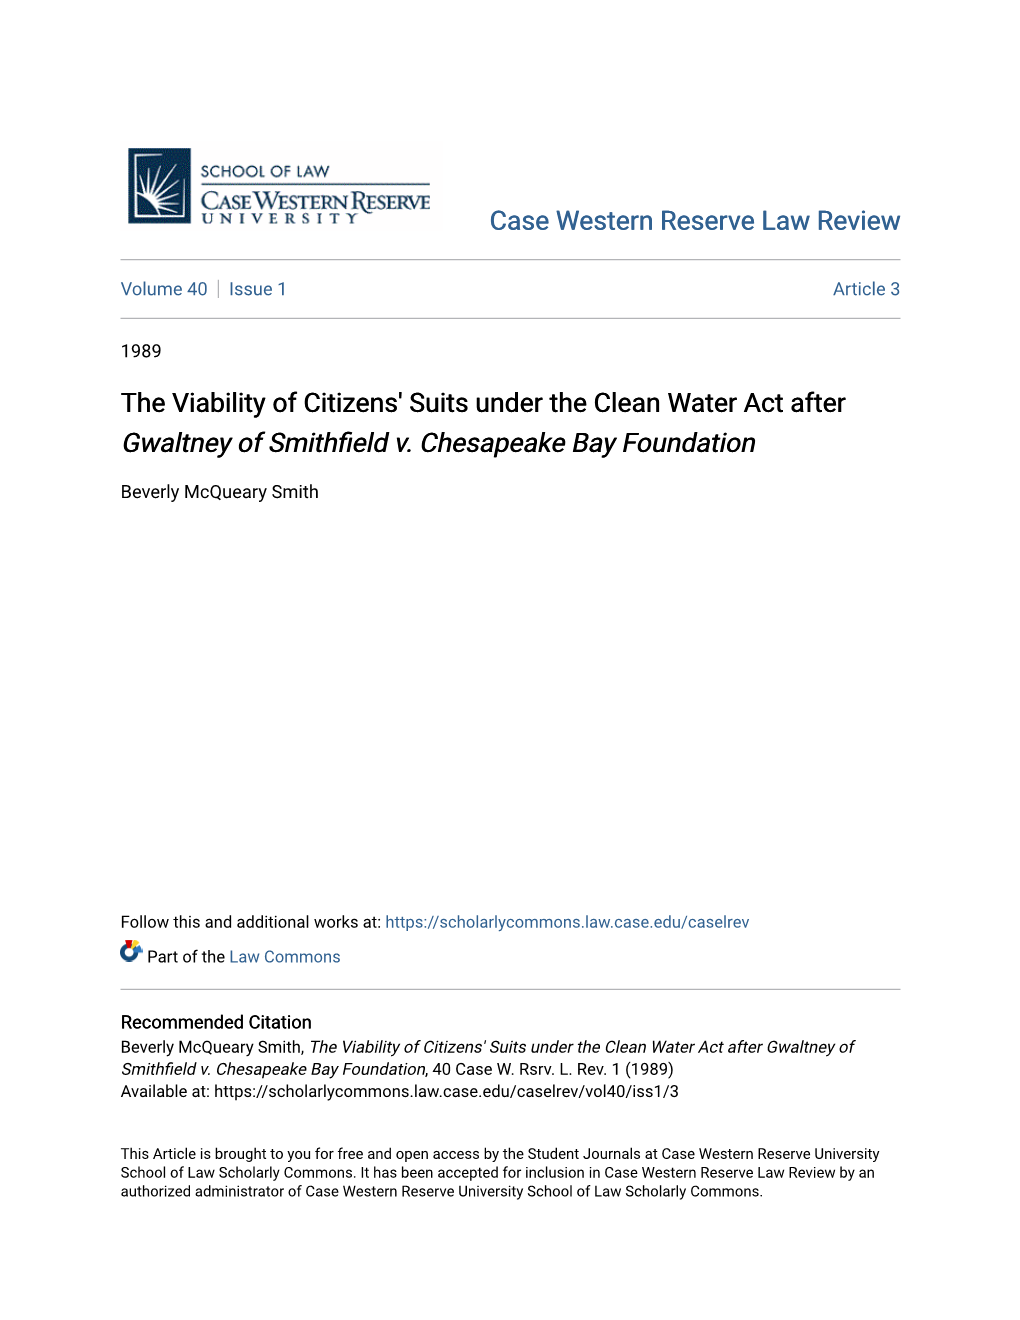 The Viability of Citizens' Suits Under the Clean Water Act After &lt;I